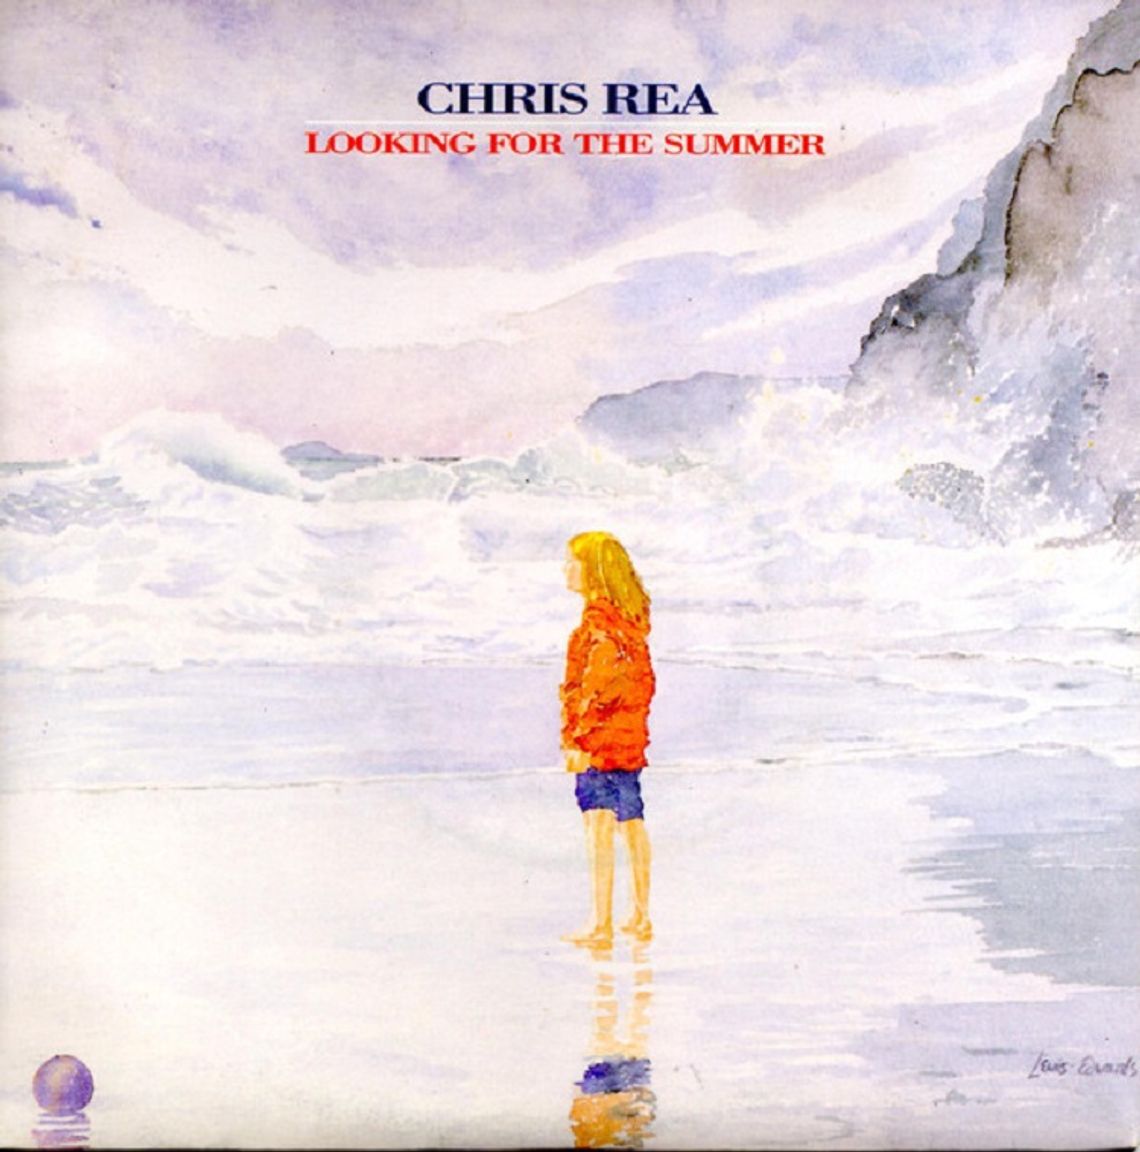 CHRIS REA "Looking for the summer"